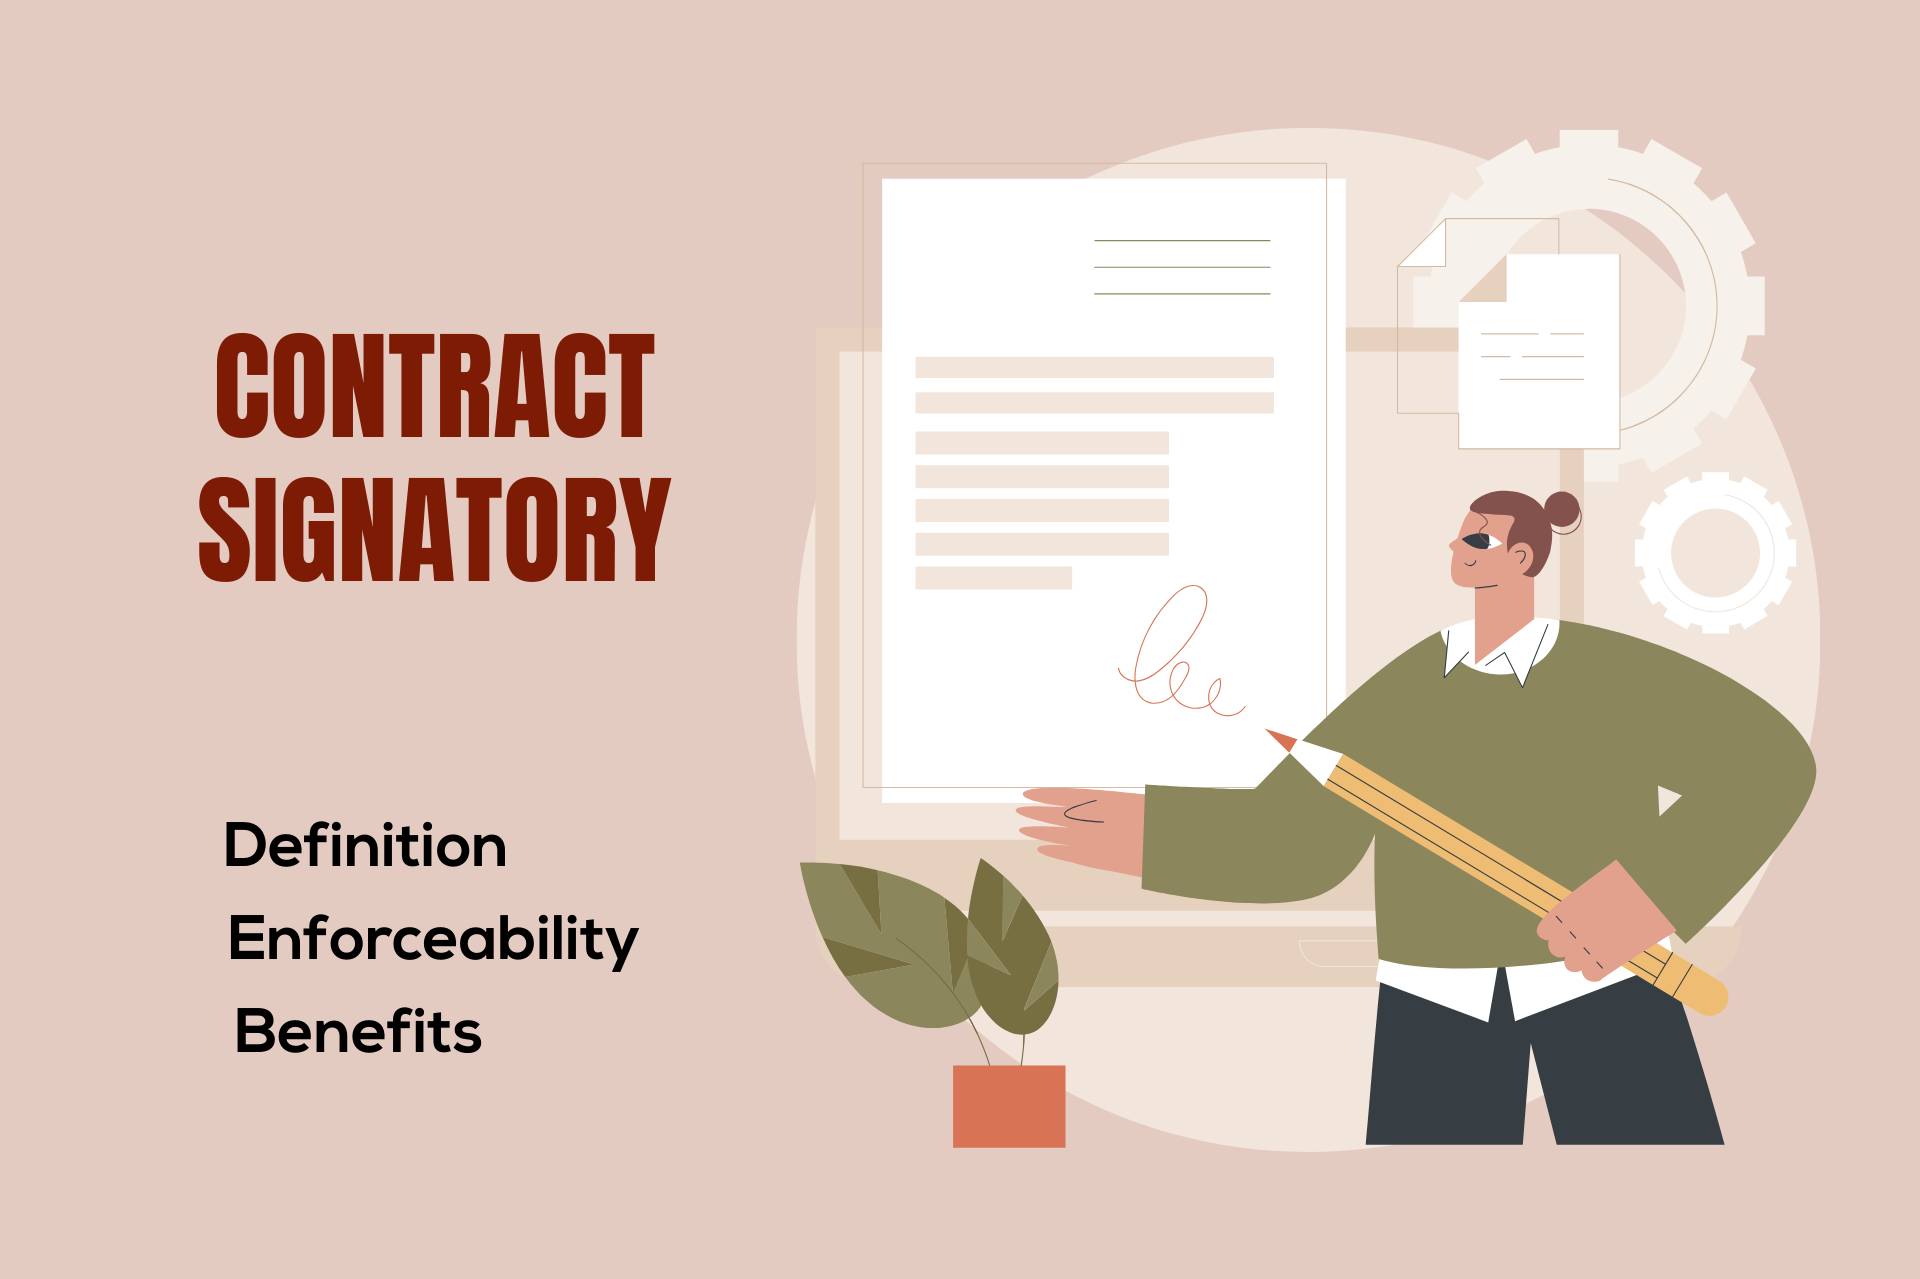 Contract Signatory Duties, Authority & Legal Implications